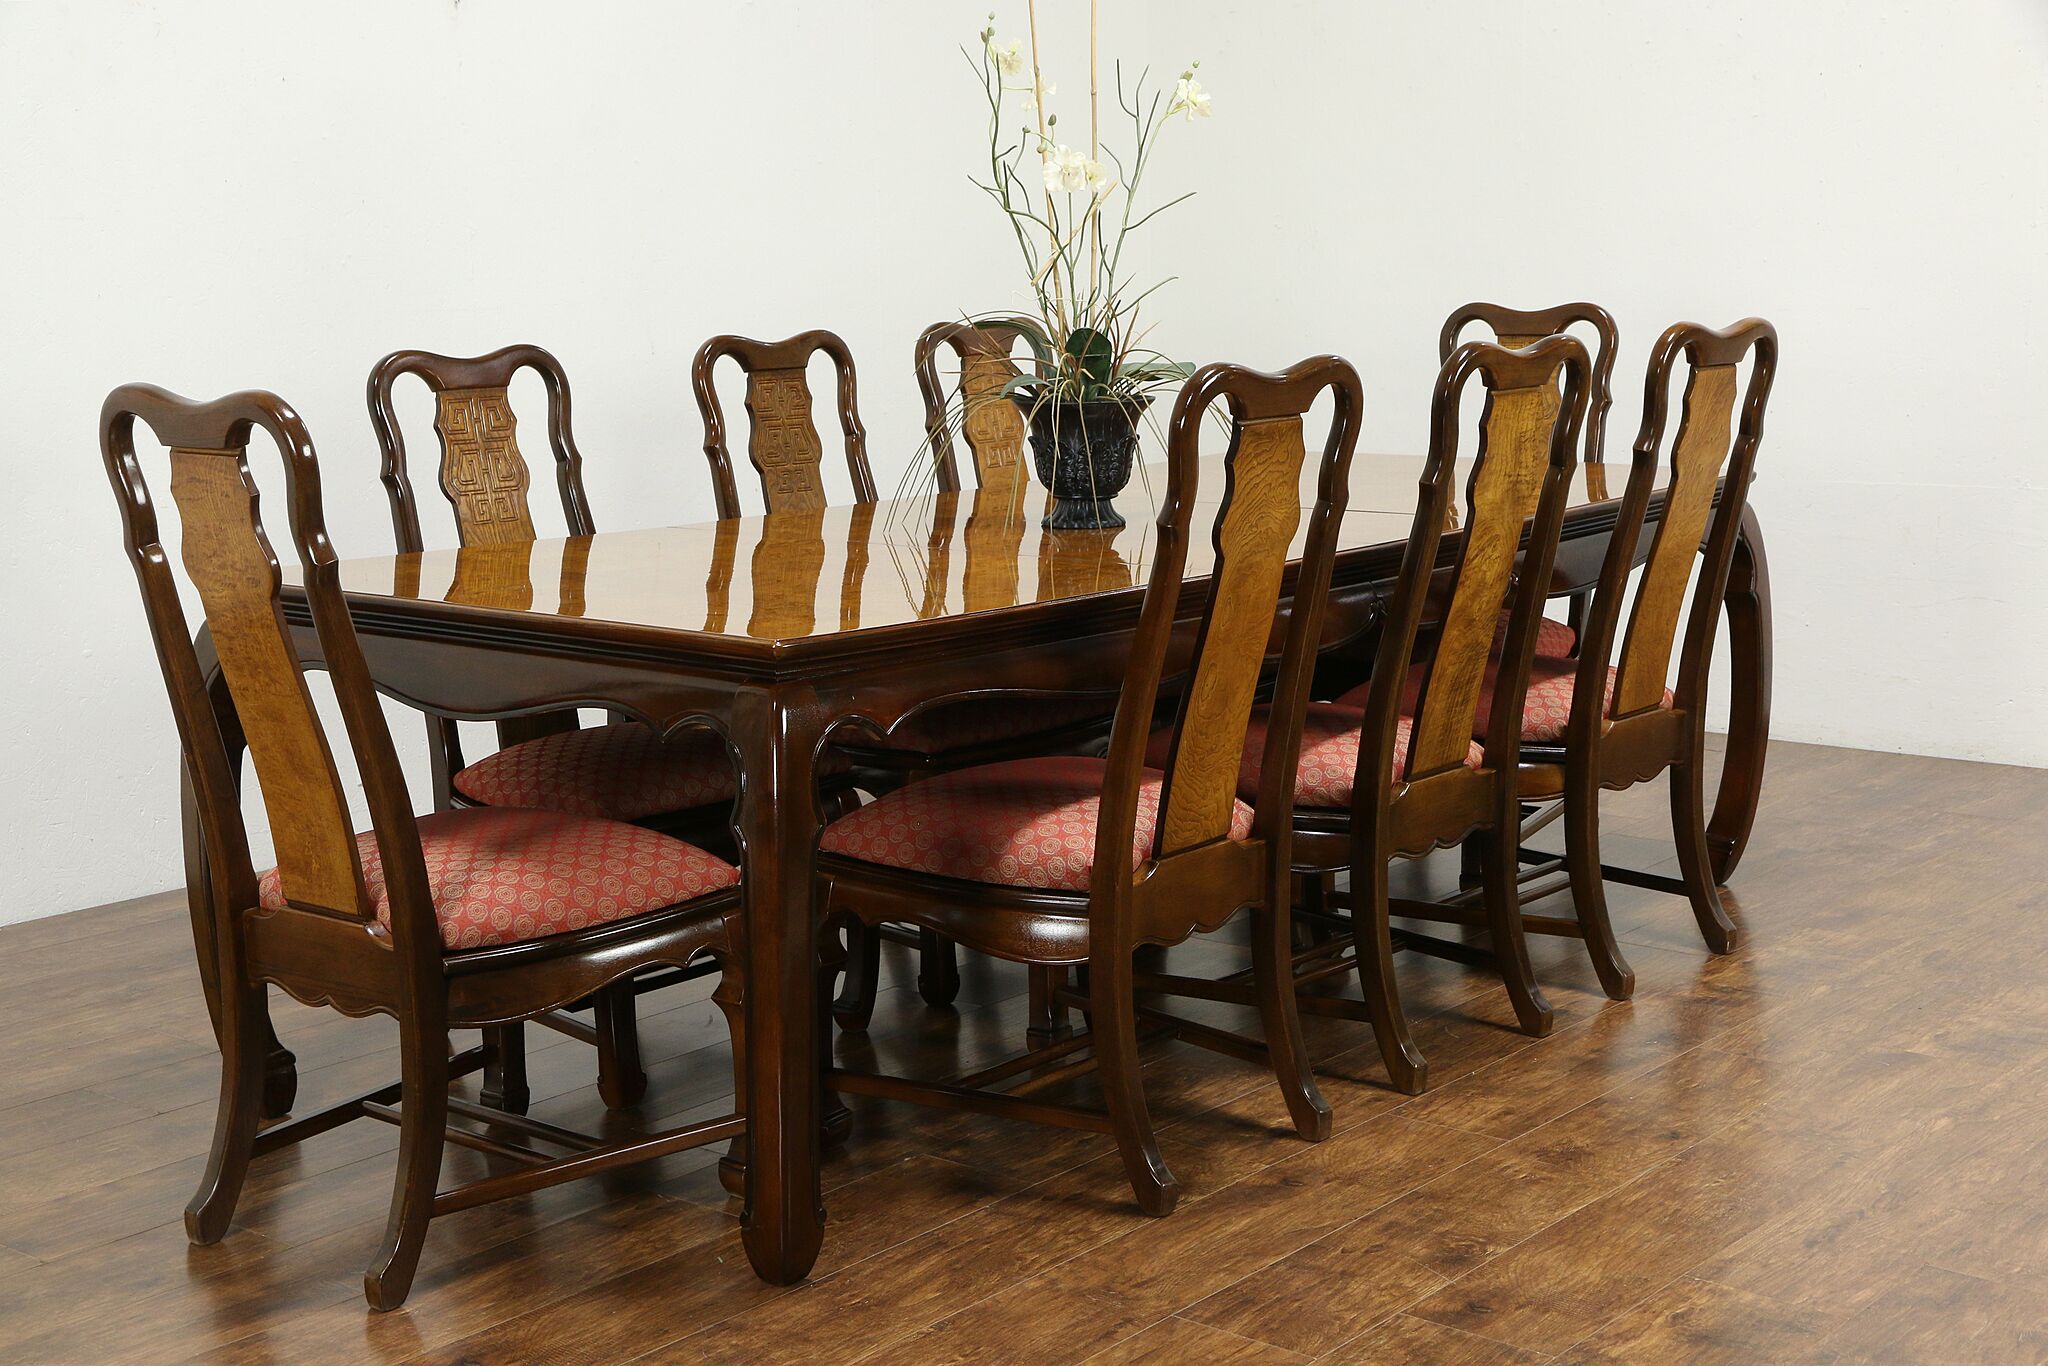 Chinese Style Vintage Dining Set Table, Universal Furniture Ltd Dining Room Table